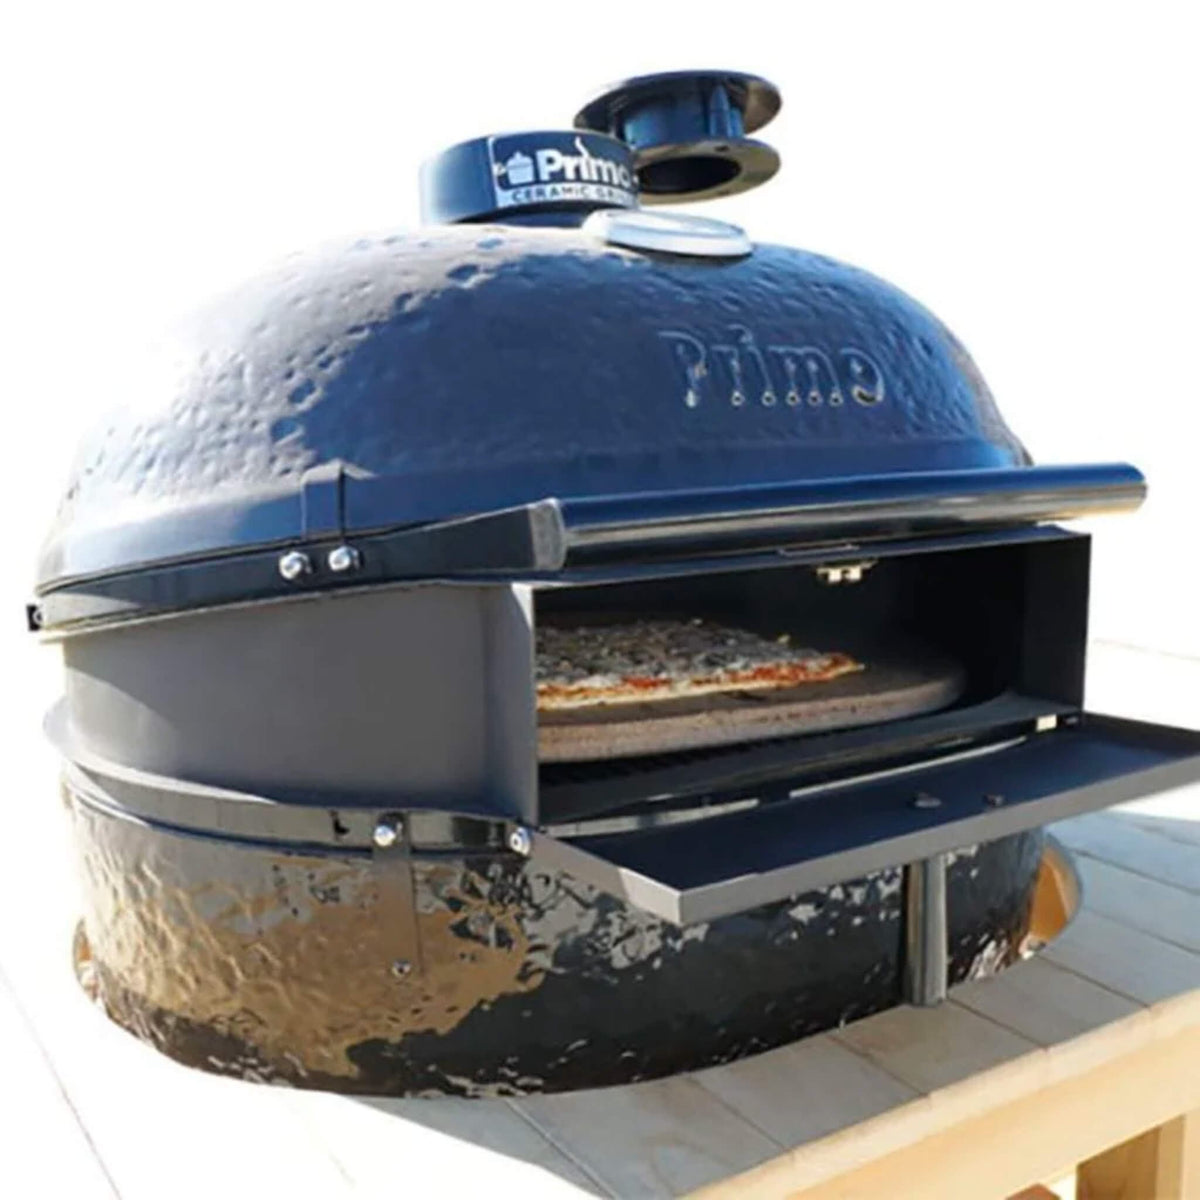 Primo Pizza Oven Insert for Oval XL 400 Charcoal Grill - Culinary Hardware